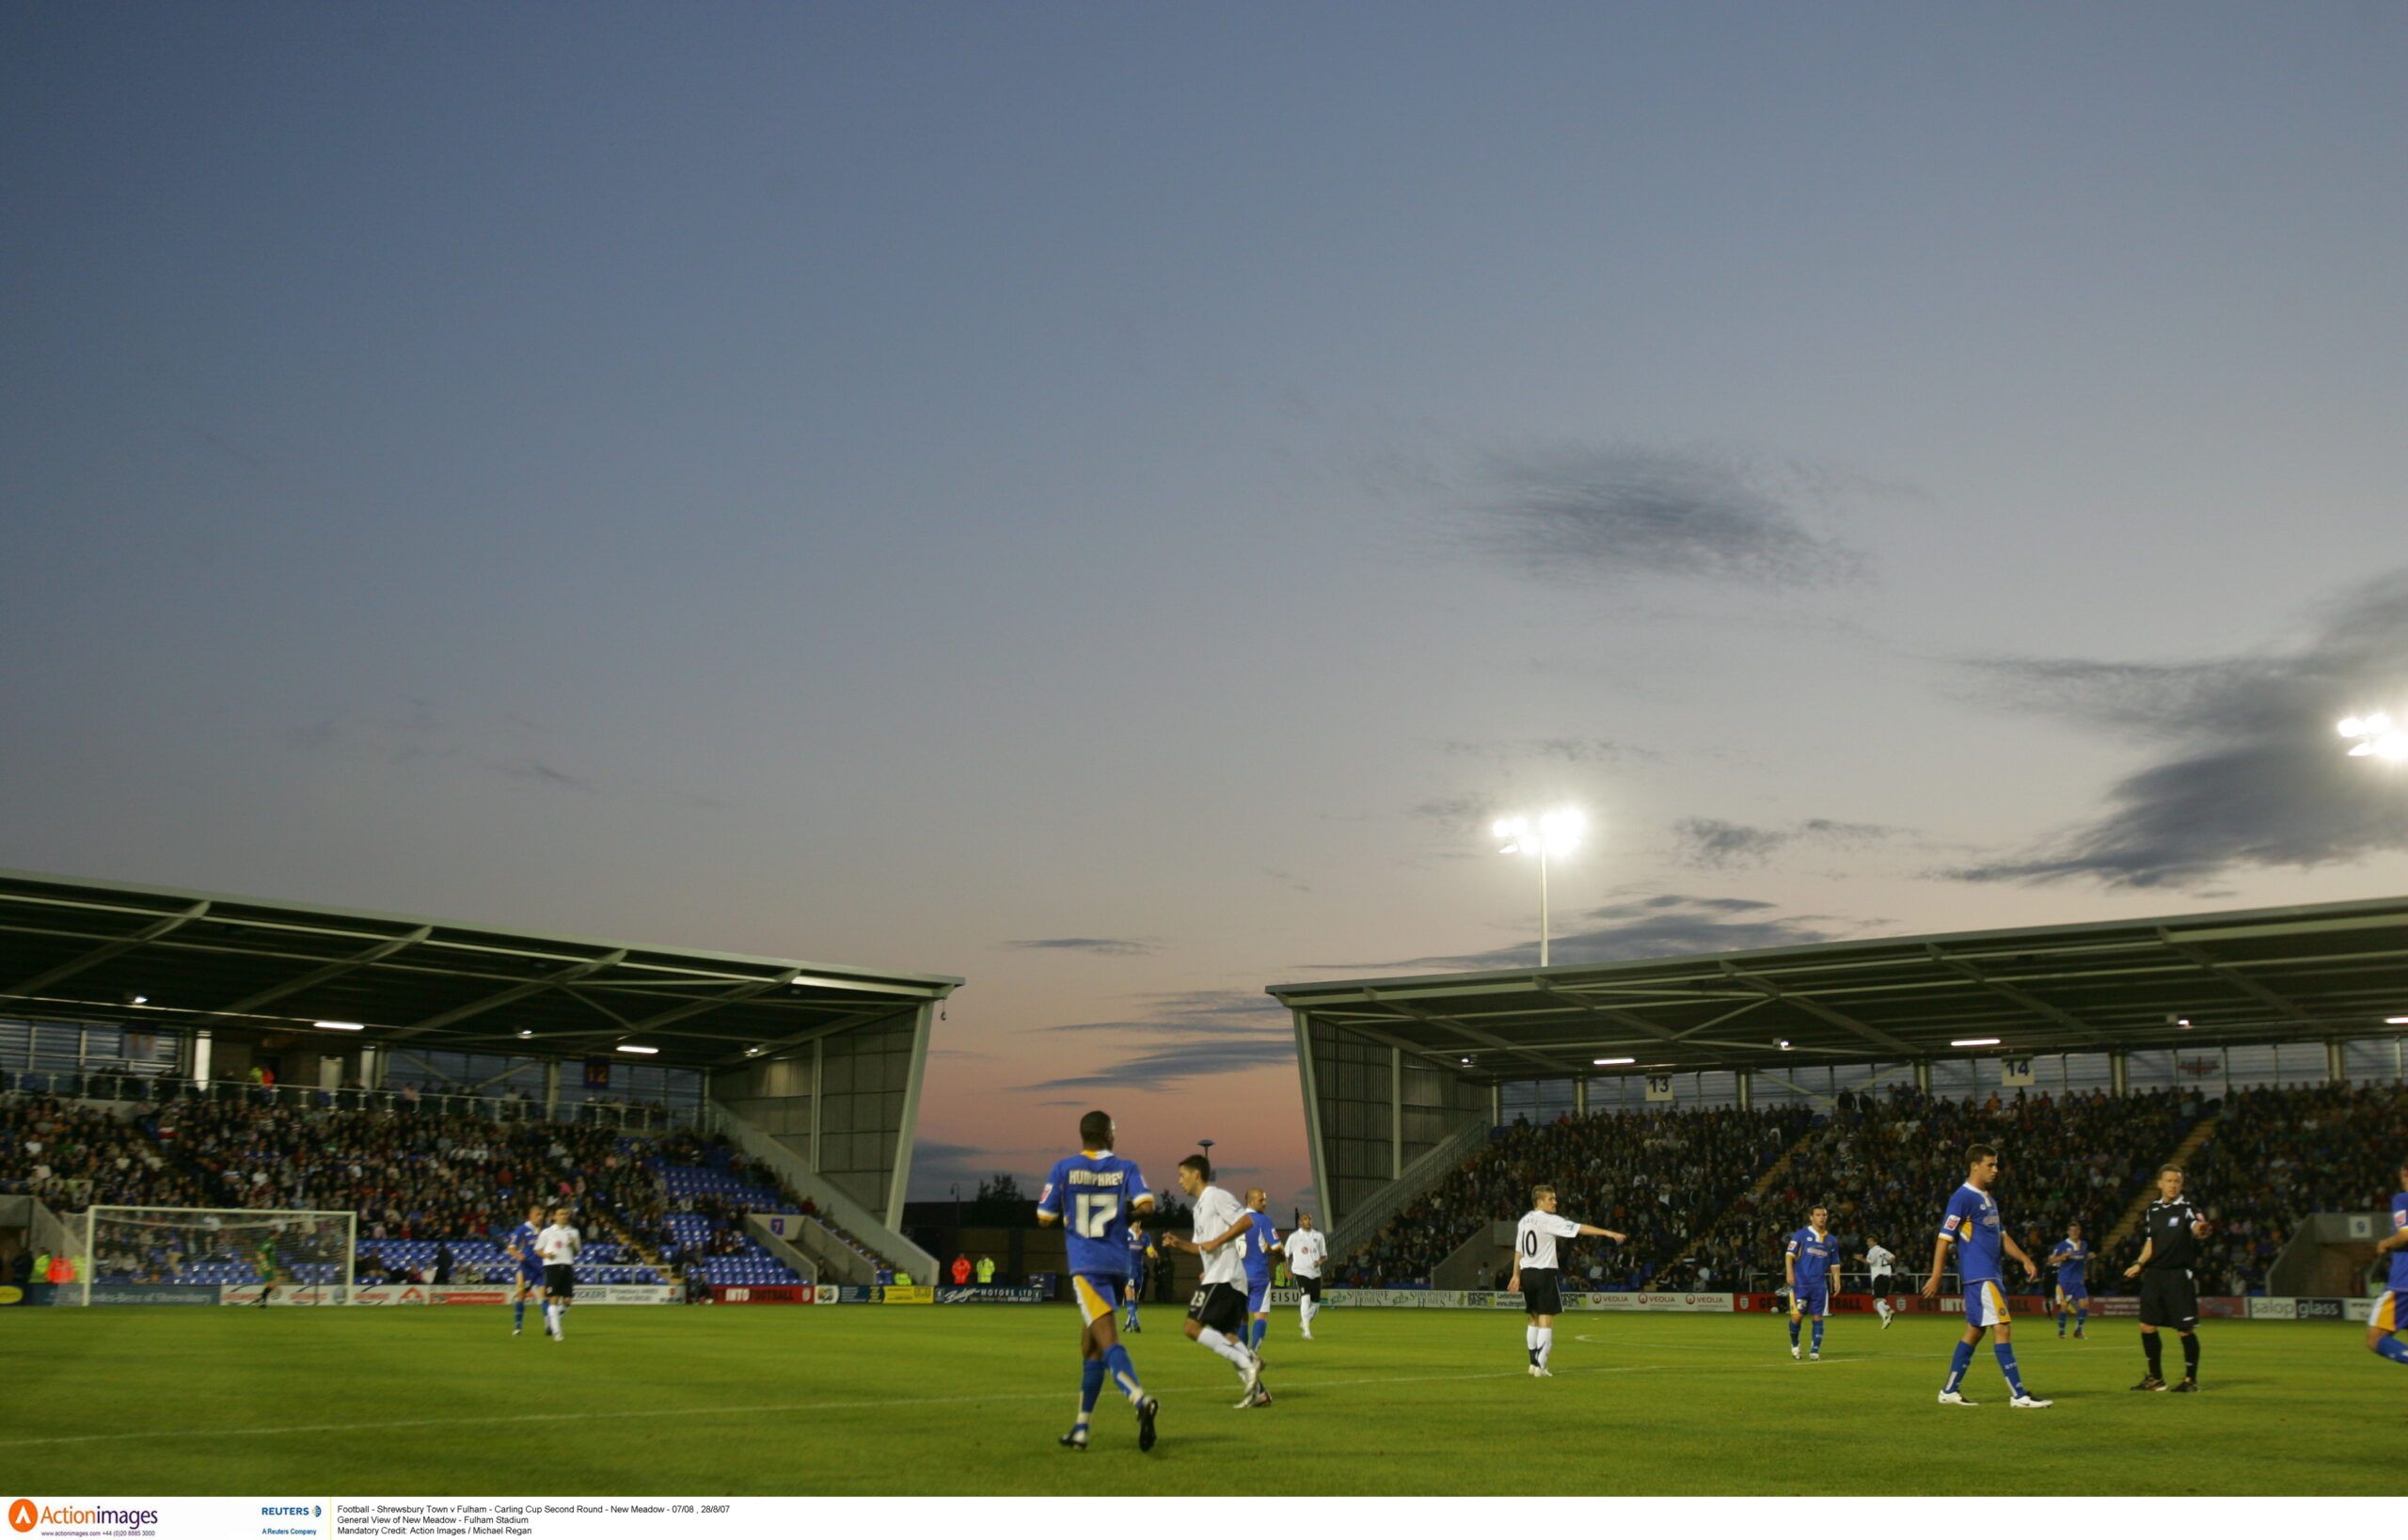 Football - Shrewsbury Town v Fulham - Carling Cup Second Round - New Meadow - 07/08 , 28/8/07 
General View of New Meadow - Fulham Stadium 
Mandatory Credit: Action Images / Michael Regan